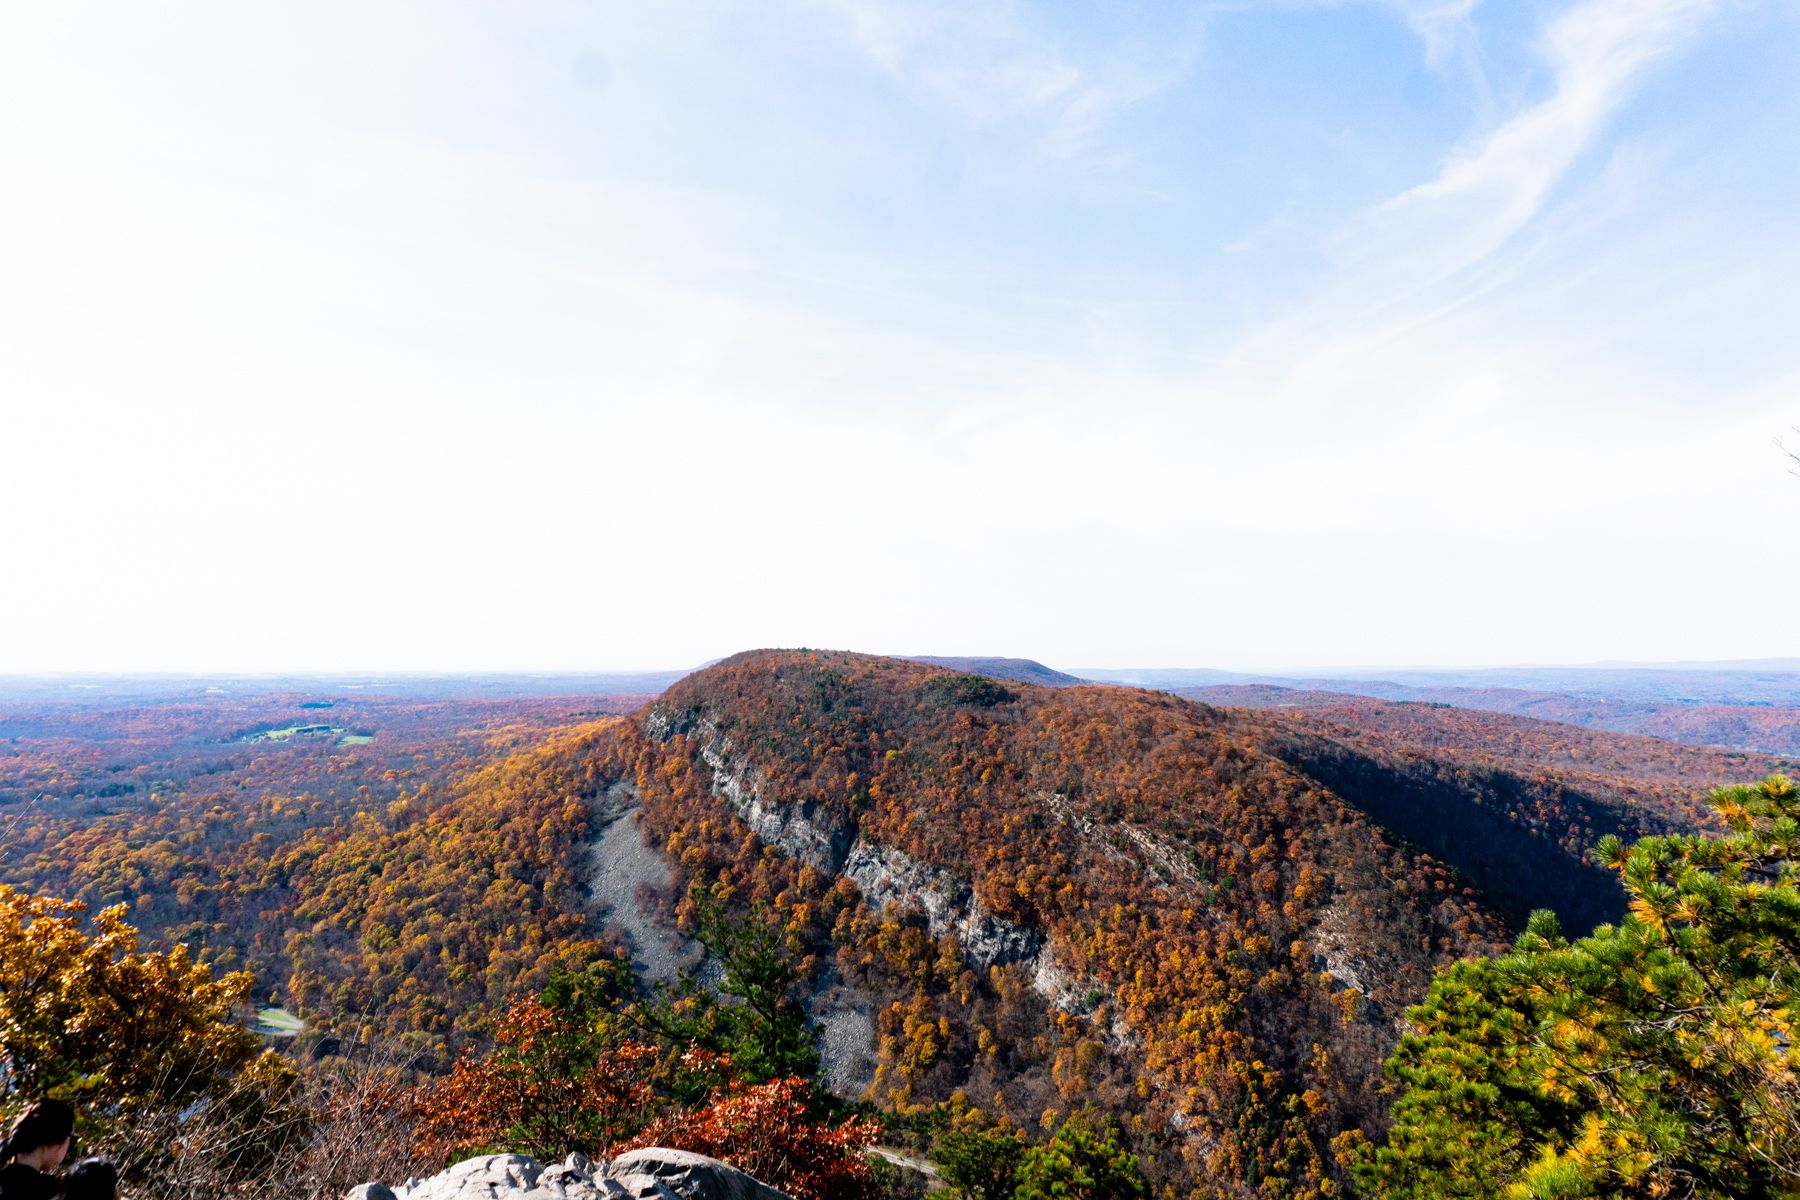 Mount Minsi on the Pennsylvania side of the Delaware Water Gap as seem from the summit of Mount Tammany in New Jersey